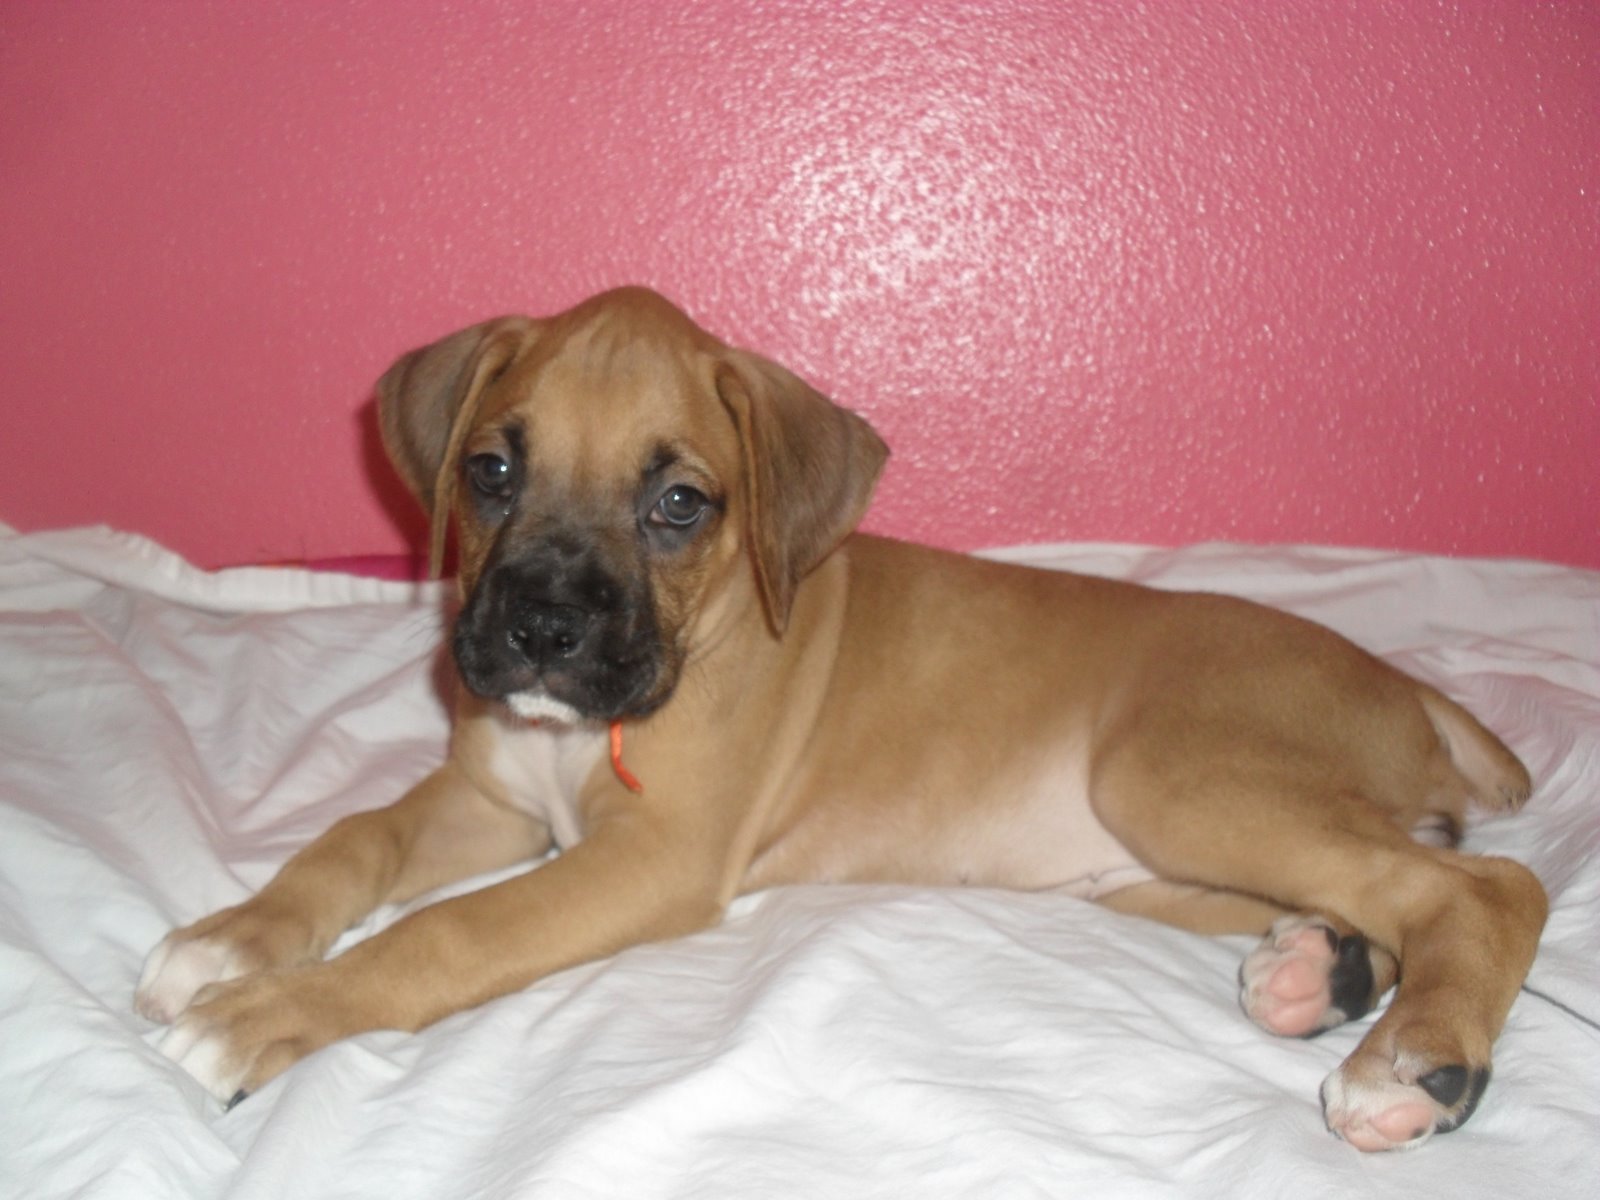 KennasDogs: PURE BREED BOXER PUPPIES FOR SALE!